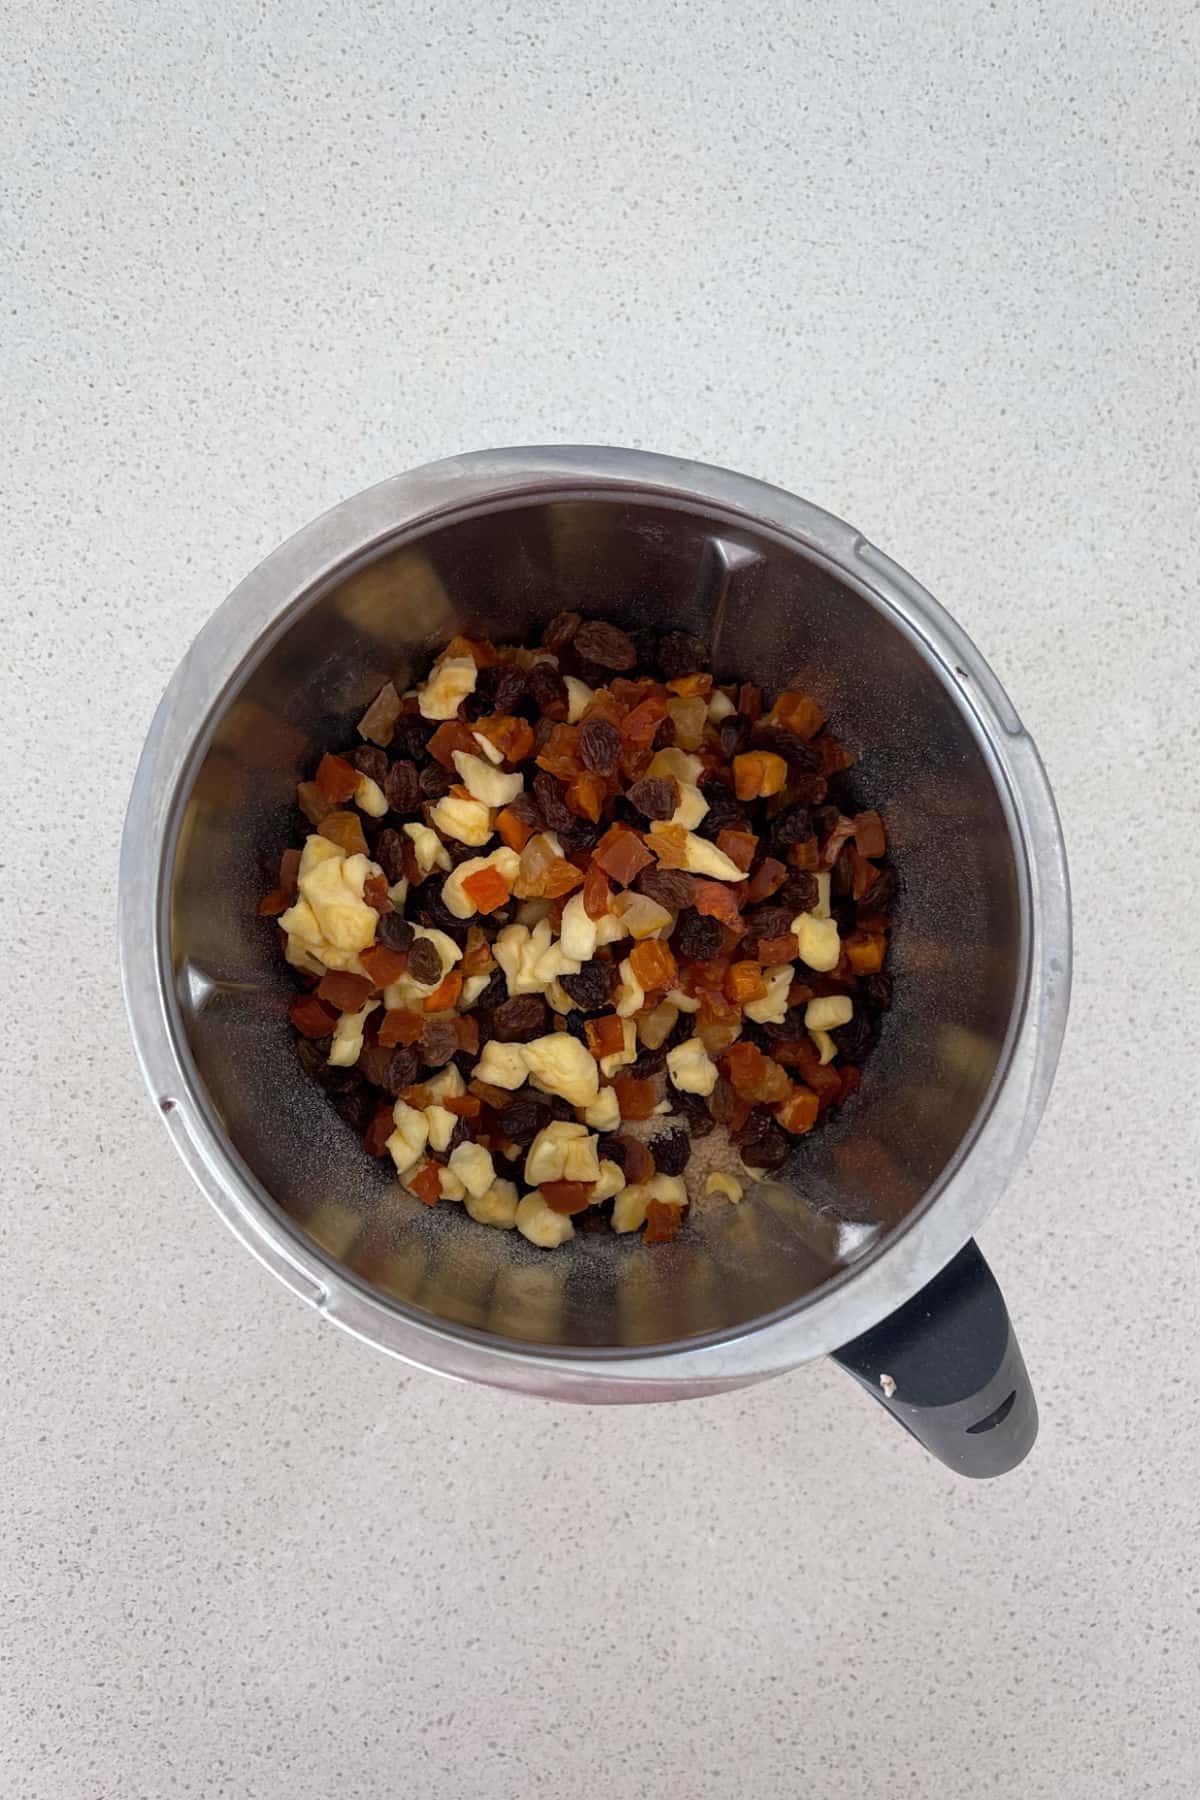 Dried fruit in thermomix bowl.